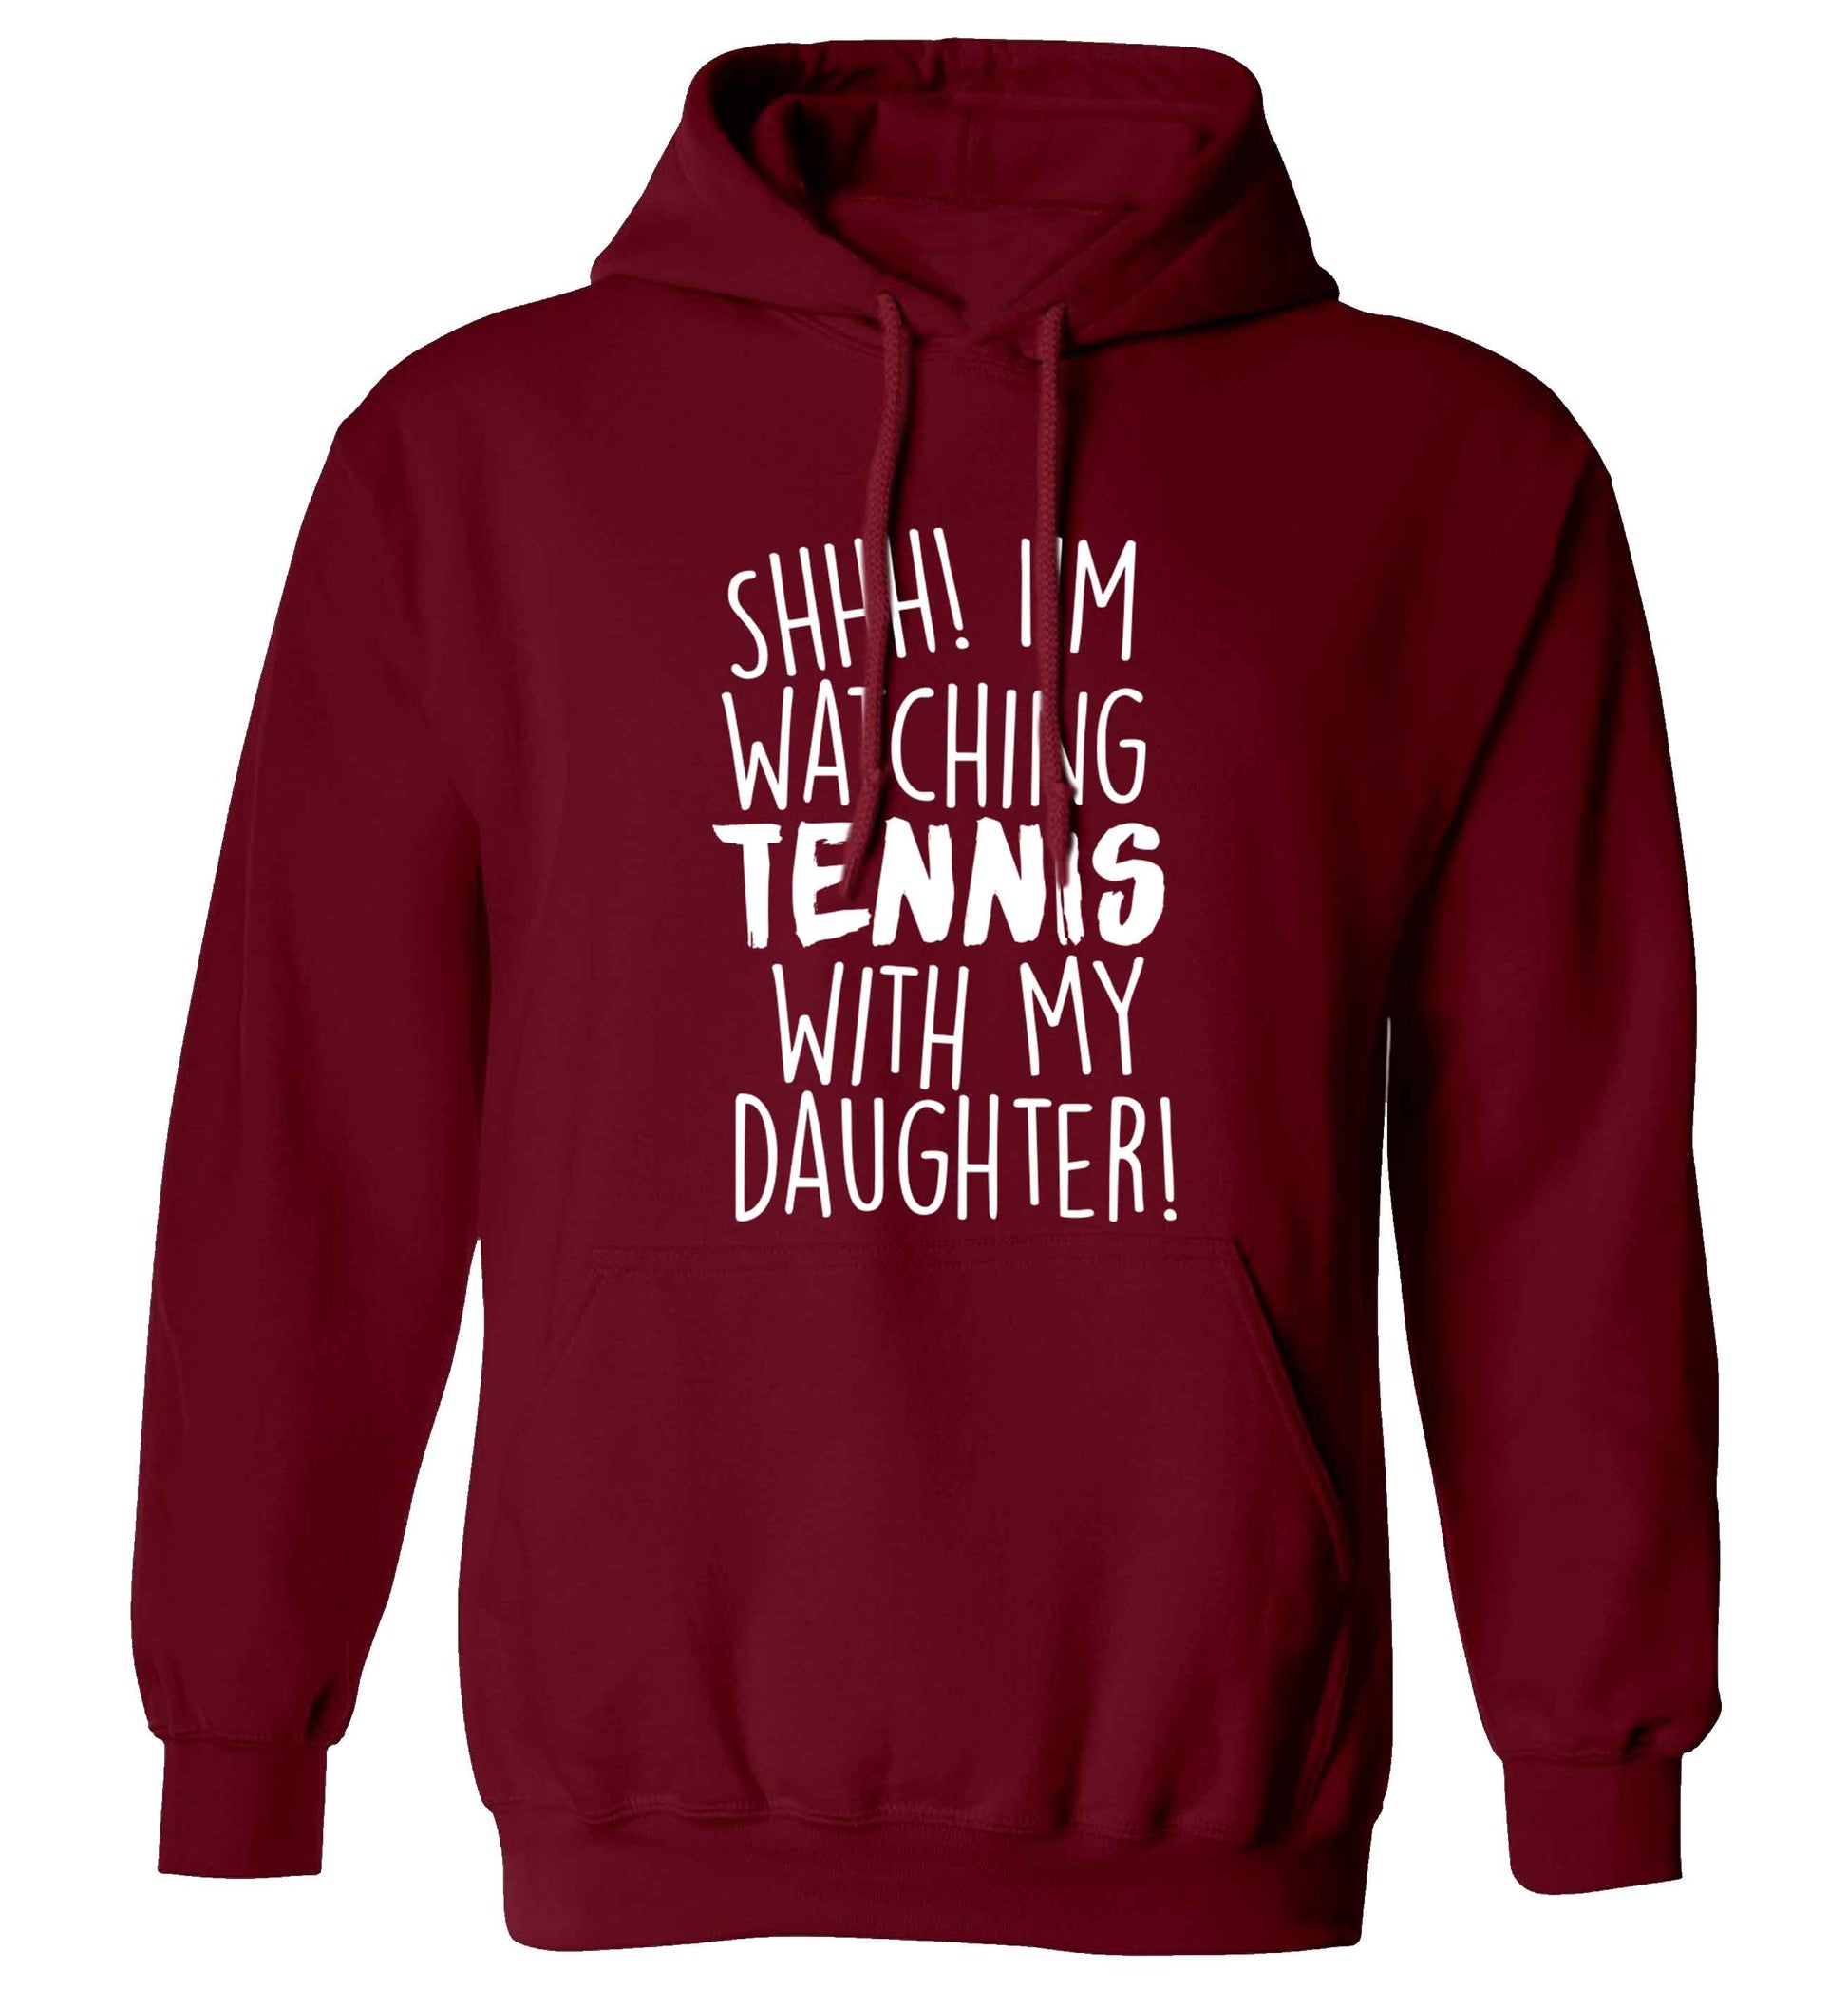 Shh! I'm watching tennis with my daughter! adults unisex maroon hoodie 2XL